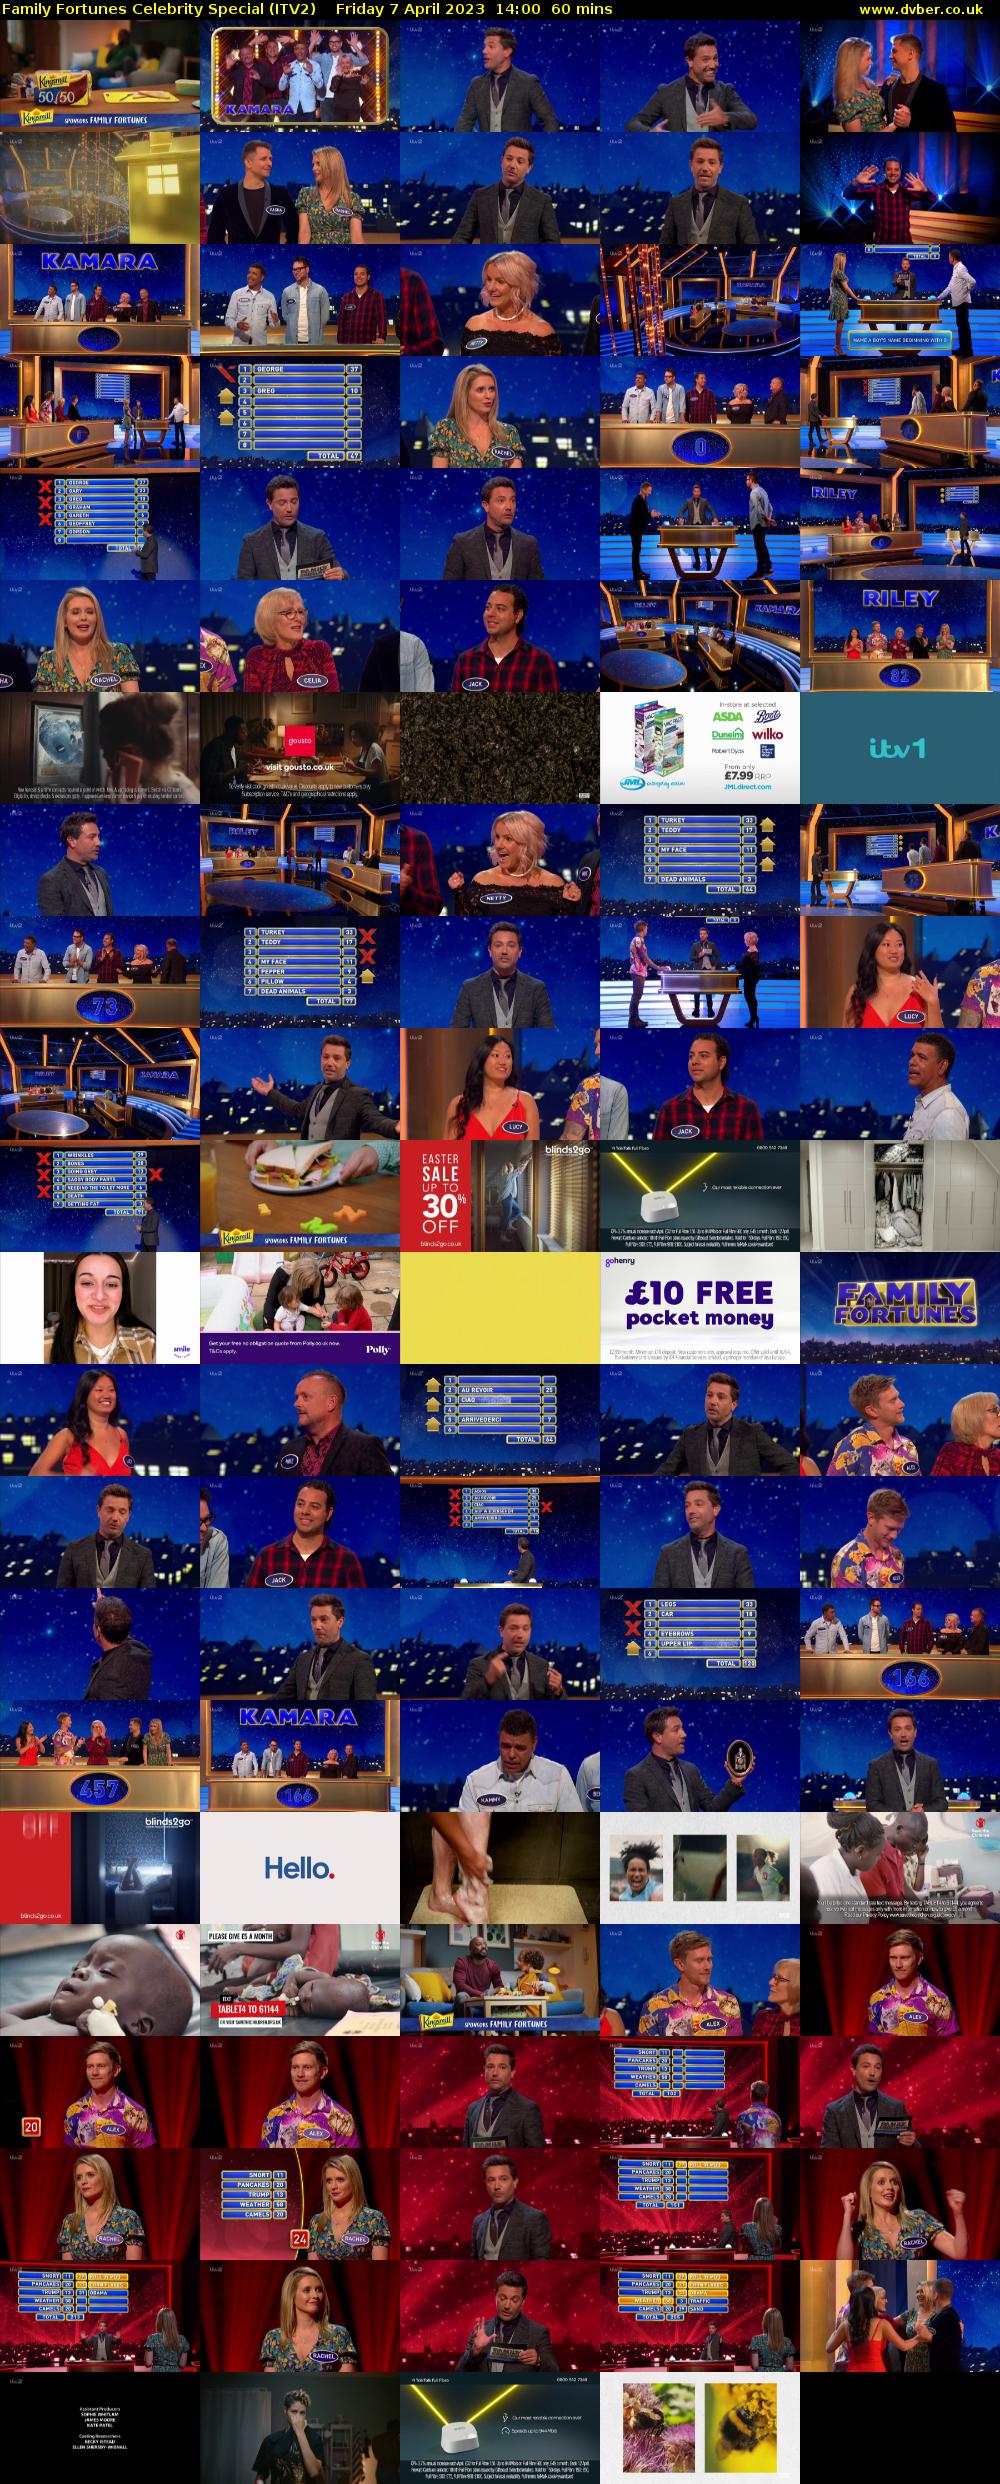 Family Fortunes Celebrity Special (ITV2) Friday 7 April 2023 14:00 - 15:00